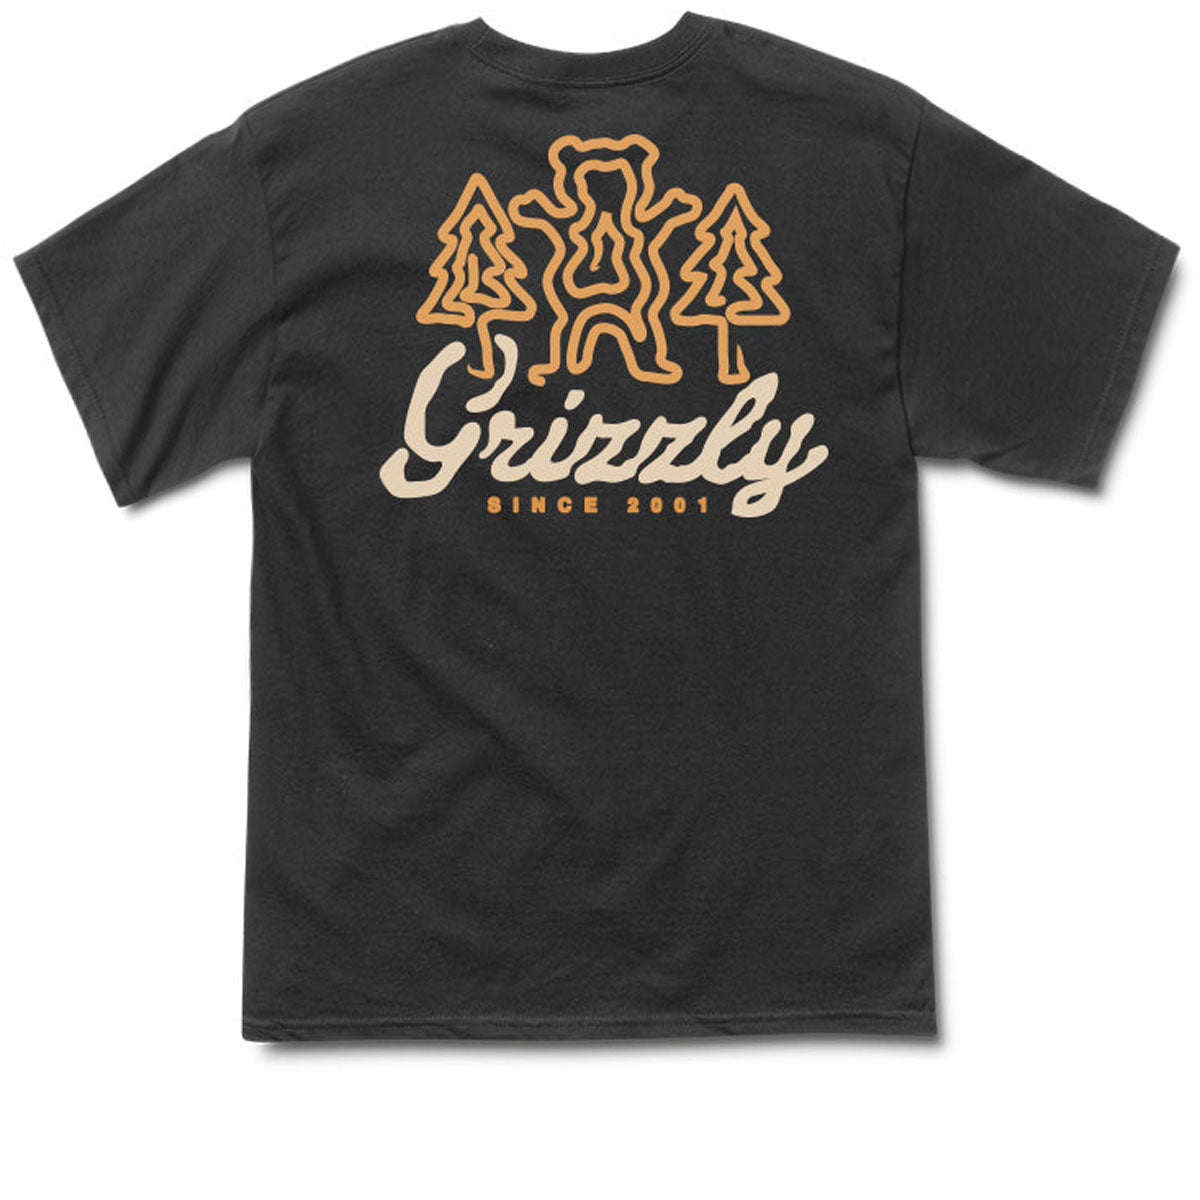 Grizzly Windy Creek T-Shirt - Black image 1